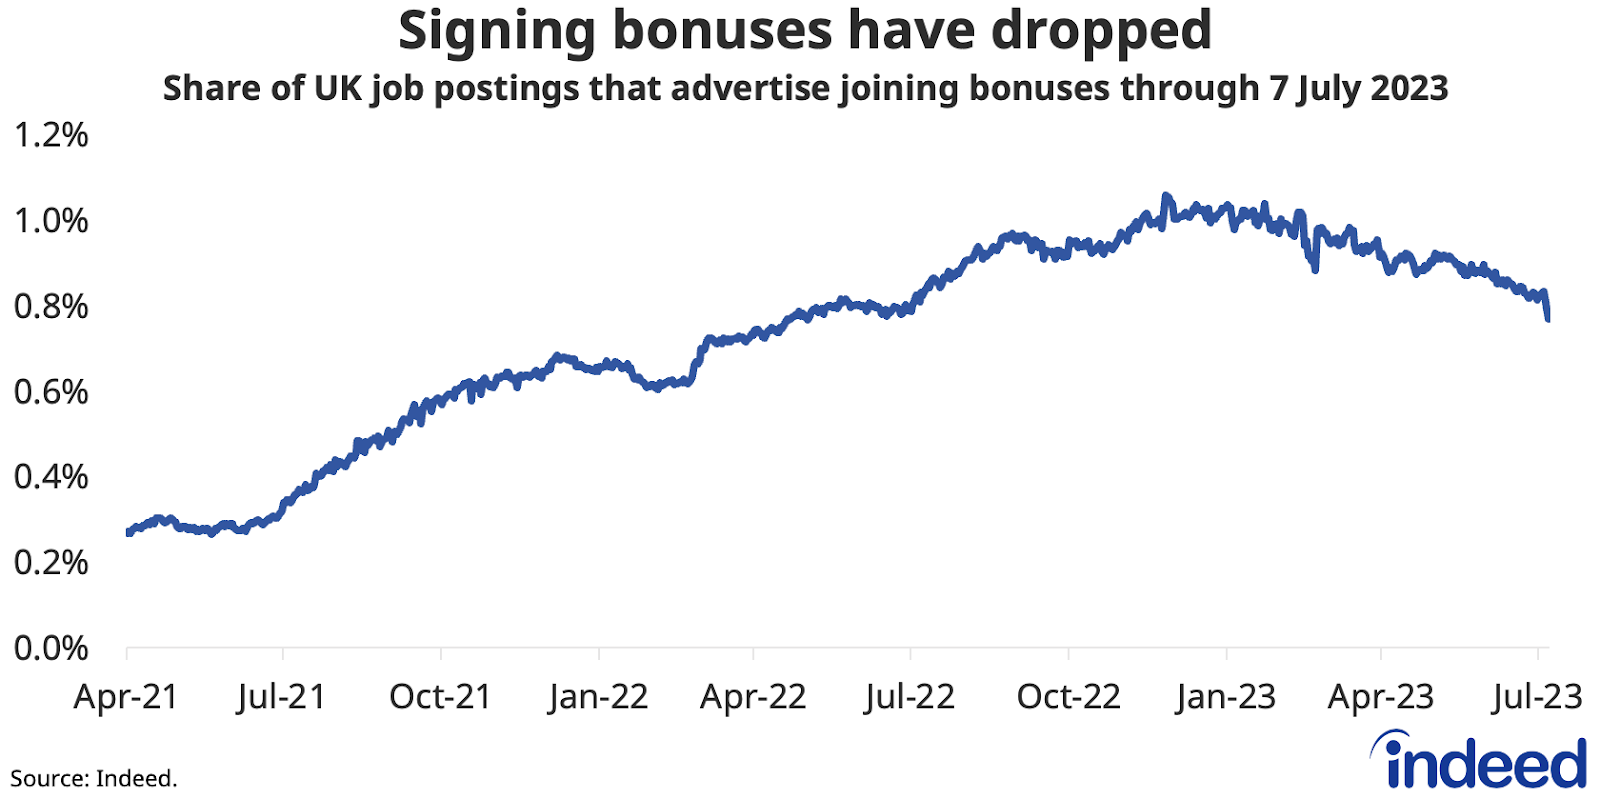 Bar chart titled “Signing bonuses have dropped” showing the share of UK job postings offering signing bonuses from 1 April 2021 to 7 July 2023. Signing bonuses have dipped to less than 0.8% of postings from a peak of 1.1% last autumn. 